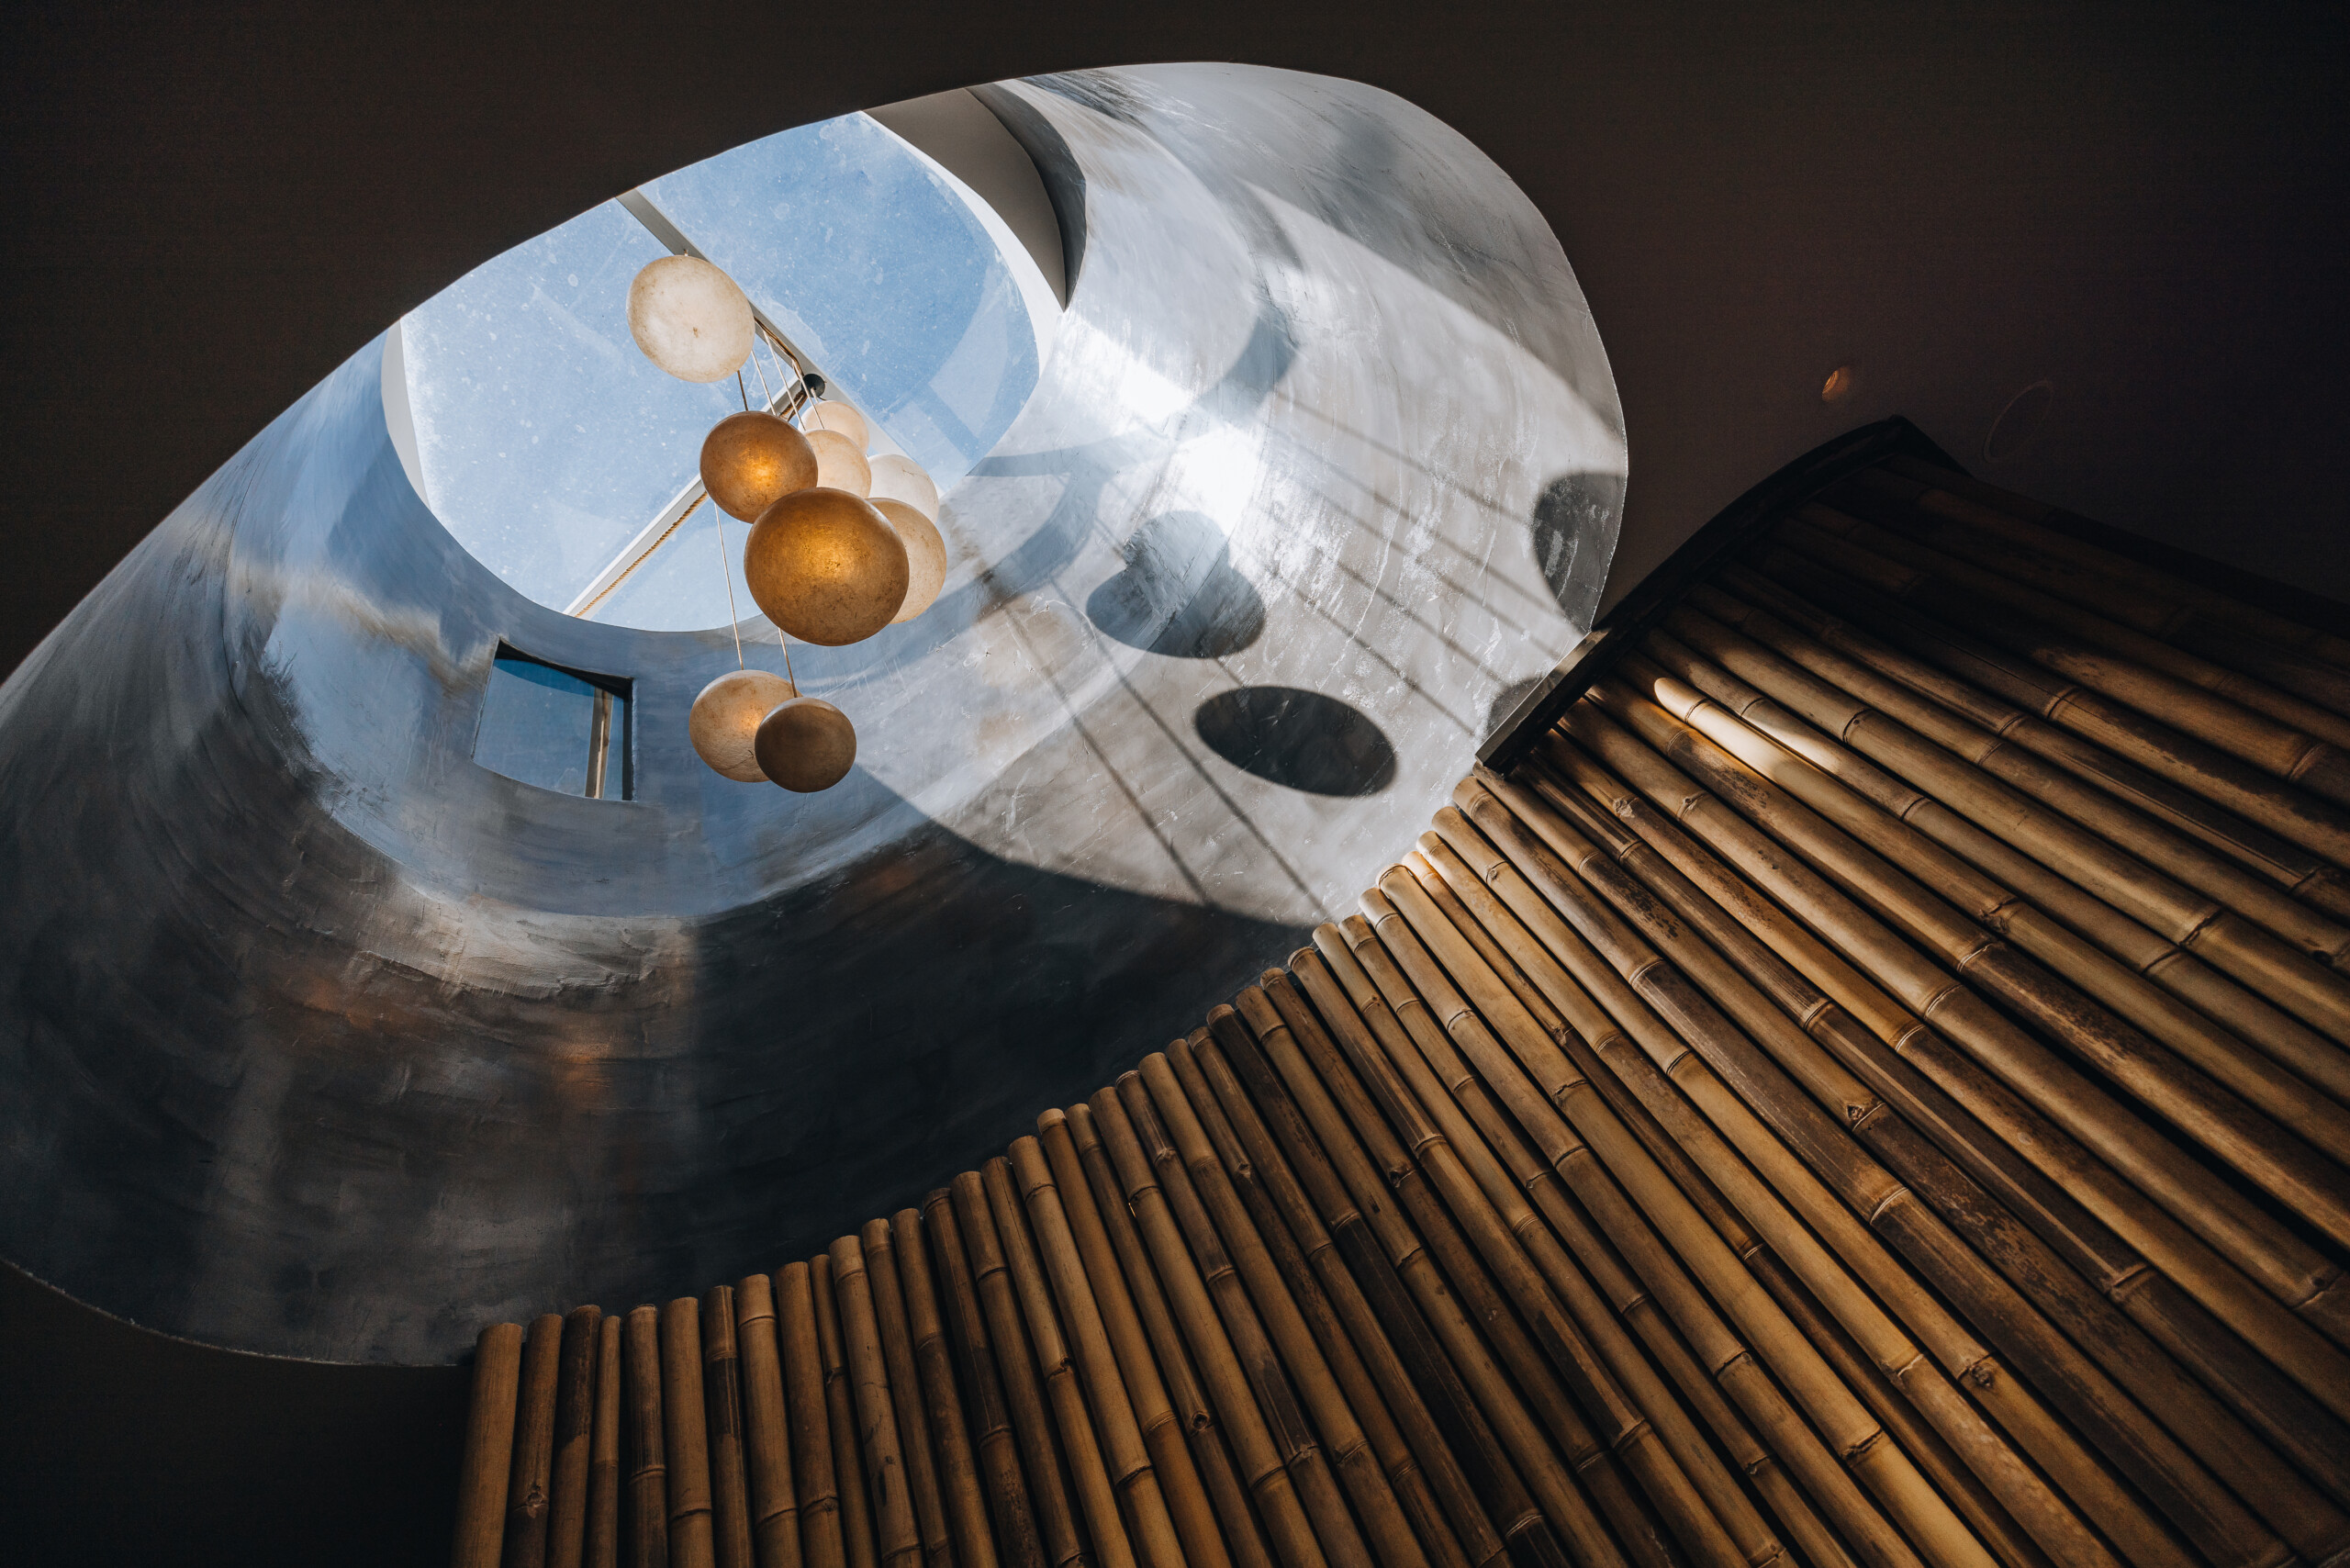 Round elements hanging of the glass ceiling in Kallos Spa, Andronis Concept Wellness Resort in Santorini